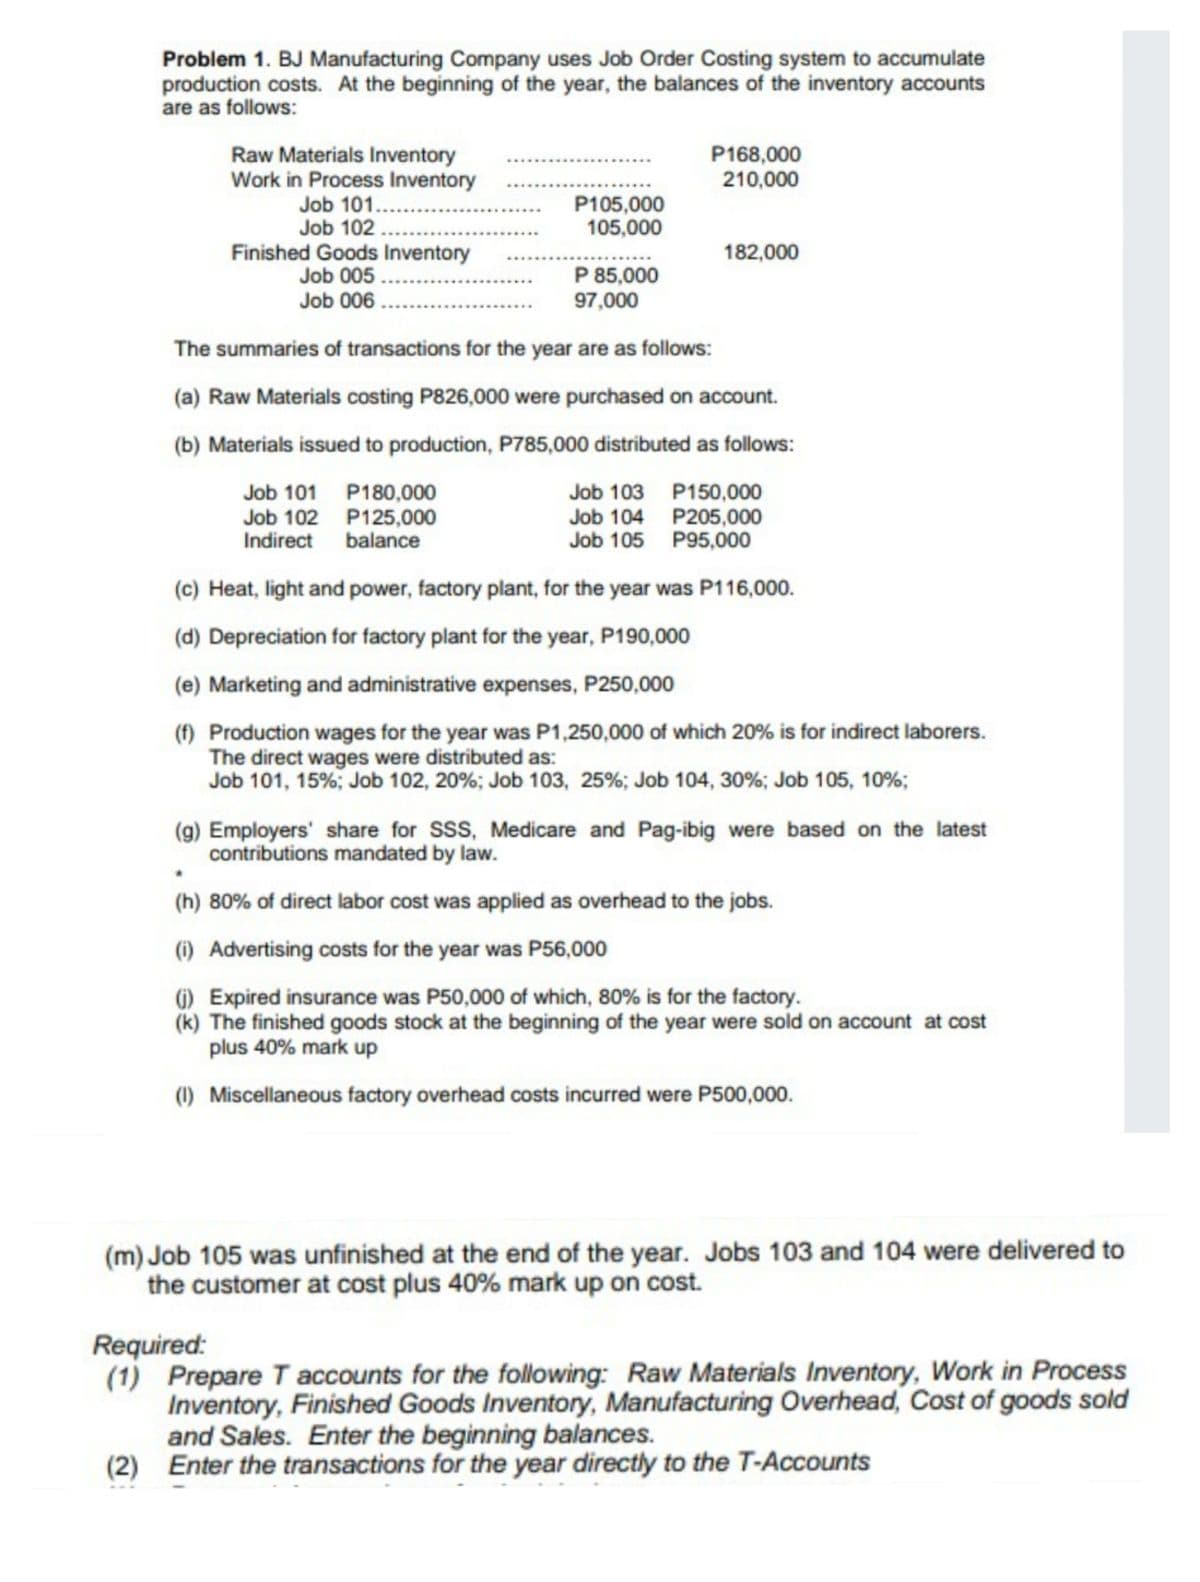 Problem 1. BJ Manufacturing Company uses Job Order Costing system to accumulate
production costs. At the beginning of the year, the balances of the inventory accounts
are as follows:
P168,000
210,000
Raw Materials Inventory
Work in Process Inventory
Job 101..
Job 102..
P105,000
105,000
Finished Goods Inventory
Job 005.
Job 006.
182,000
P 85,000
97,000
The summaries of transactions for the year are as follows:
(a) Raw Materials costing P826,000 were purchased on account.
(b) Materials issued to production, P785,000 distributed as follows:
Job 101 P180,000
Job 102 P125,000
Indirect balance
Job 103 P150,000
Job 104 P205,000
Job 105 P95,000
(c) Heat, light and power, factory plant, for the year was P116,000.
(d) Depreciation for factory plant for the year, P190,000
(e) Marketing and administrative expenses, P250,000
(f) Production wages for the year was P1,250,000 of which 20% is for indirect laborers.
The direct wages were distributed as:
Job 101, 15%; Job 102, 20%; Job 103, 25%; Job 104, 30%; Job 105, 10%;
(g) Employers' share for SSS, Medicare and Pag-ibig were based on the latest
contributions mandated by law.
(h) 80% of direct labor cost was applied as overhead to the jobs.
(1) Advertising costs for the year was P56,000
) Expired insurance was P50,000 of which, 80% is for the factory.
(k) The finished goods stock at the beginning of the year were sold on account at cost
plus 40% mark up
(1) Miscellaneous factory overhead costs incurred were P500,000.
(m) Job 105 was unfinished at the end of the year. Jobs 103 and 104 were delivered to
the customer at cost plus 40% mark up on cost.
Required:
(1) Prepare T accounts for the following: Raw Materials Inventory, Work in Process
Inventory, Finished Goods Inventory, Manufacturing Overhead, Cost of goods sold
and Sales. Enter the beginning balances.
(2) Enter the transactions for the year directly to the T-Accounts
